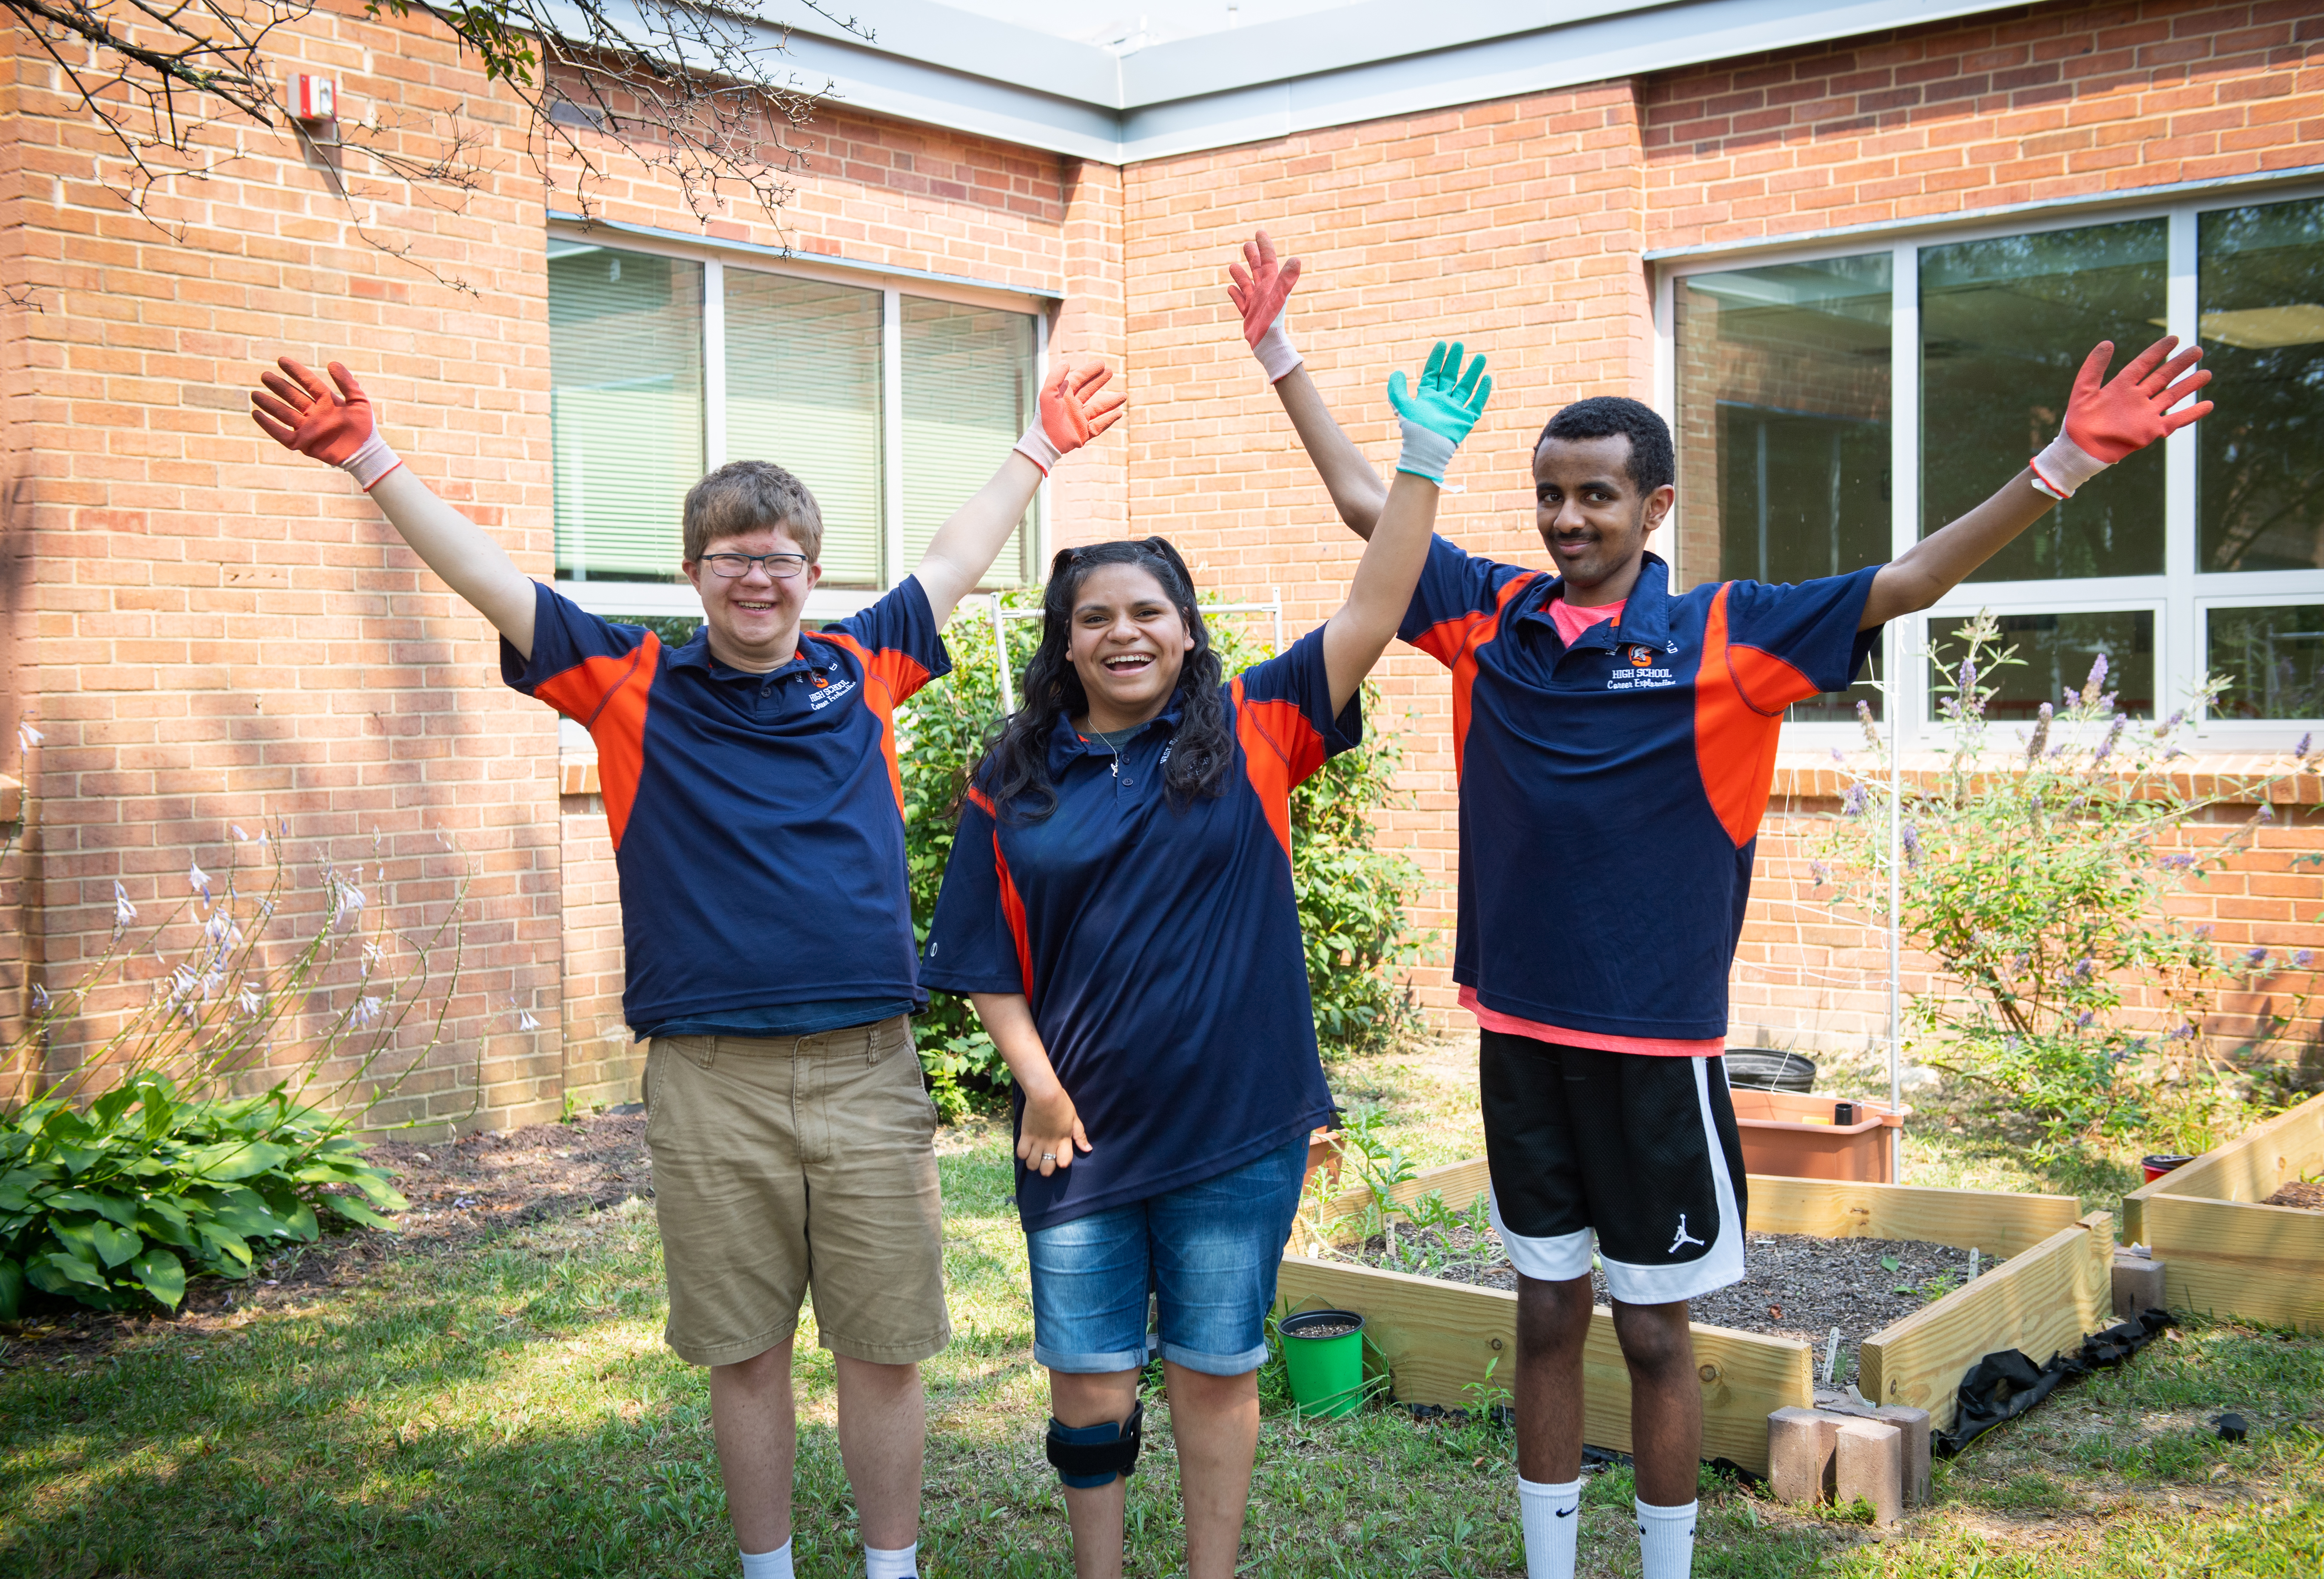 Getting the job done: John, Ariana and Yisak worked with other students to transform this green space.